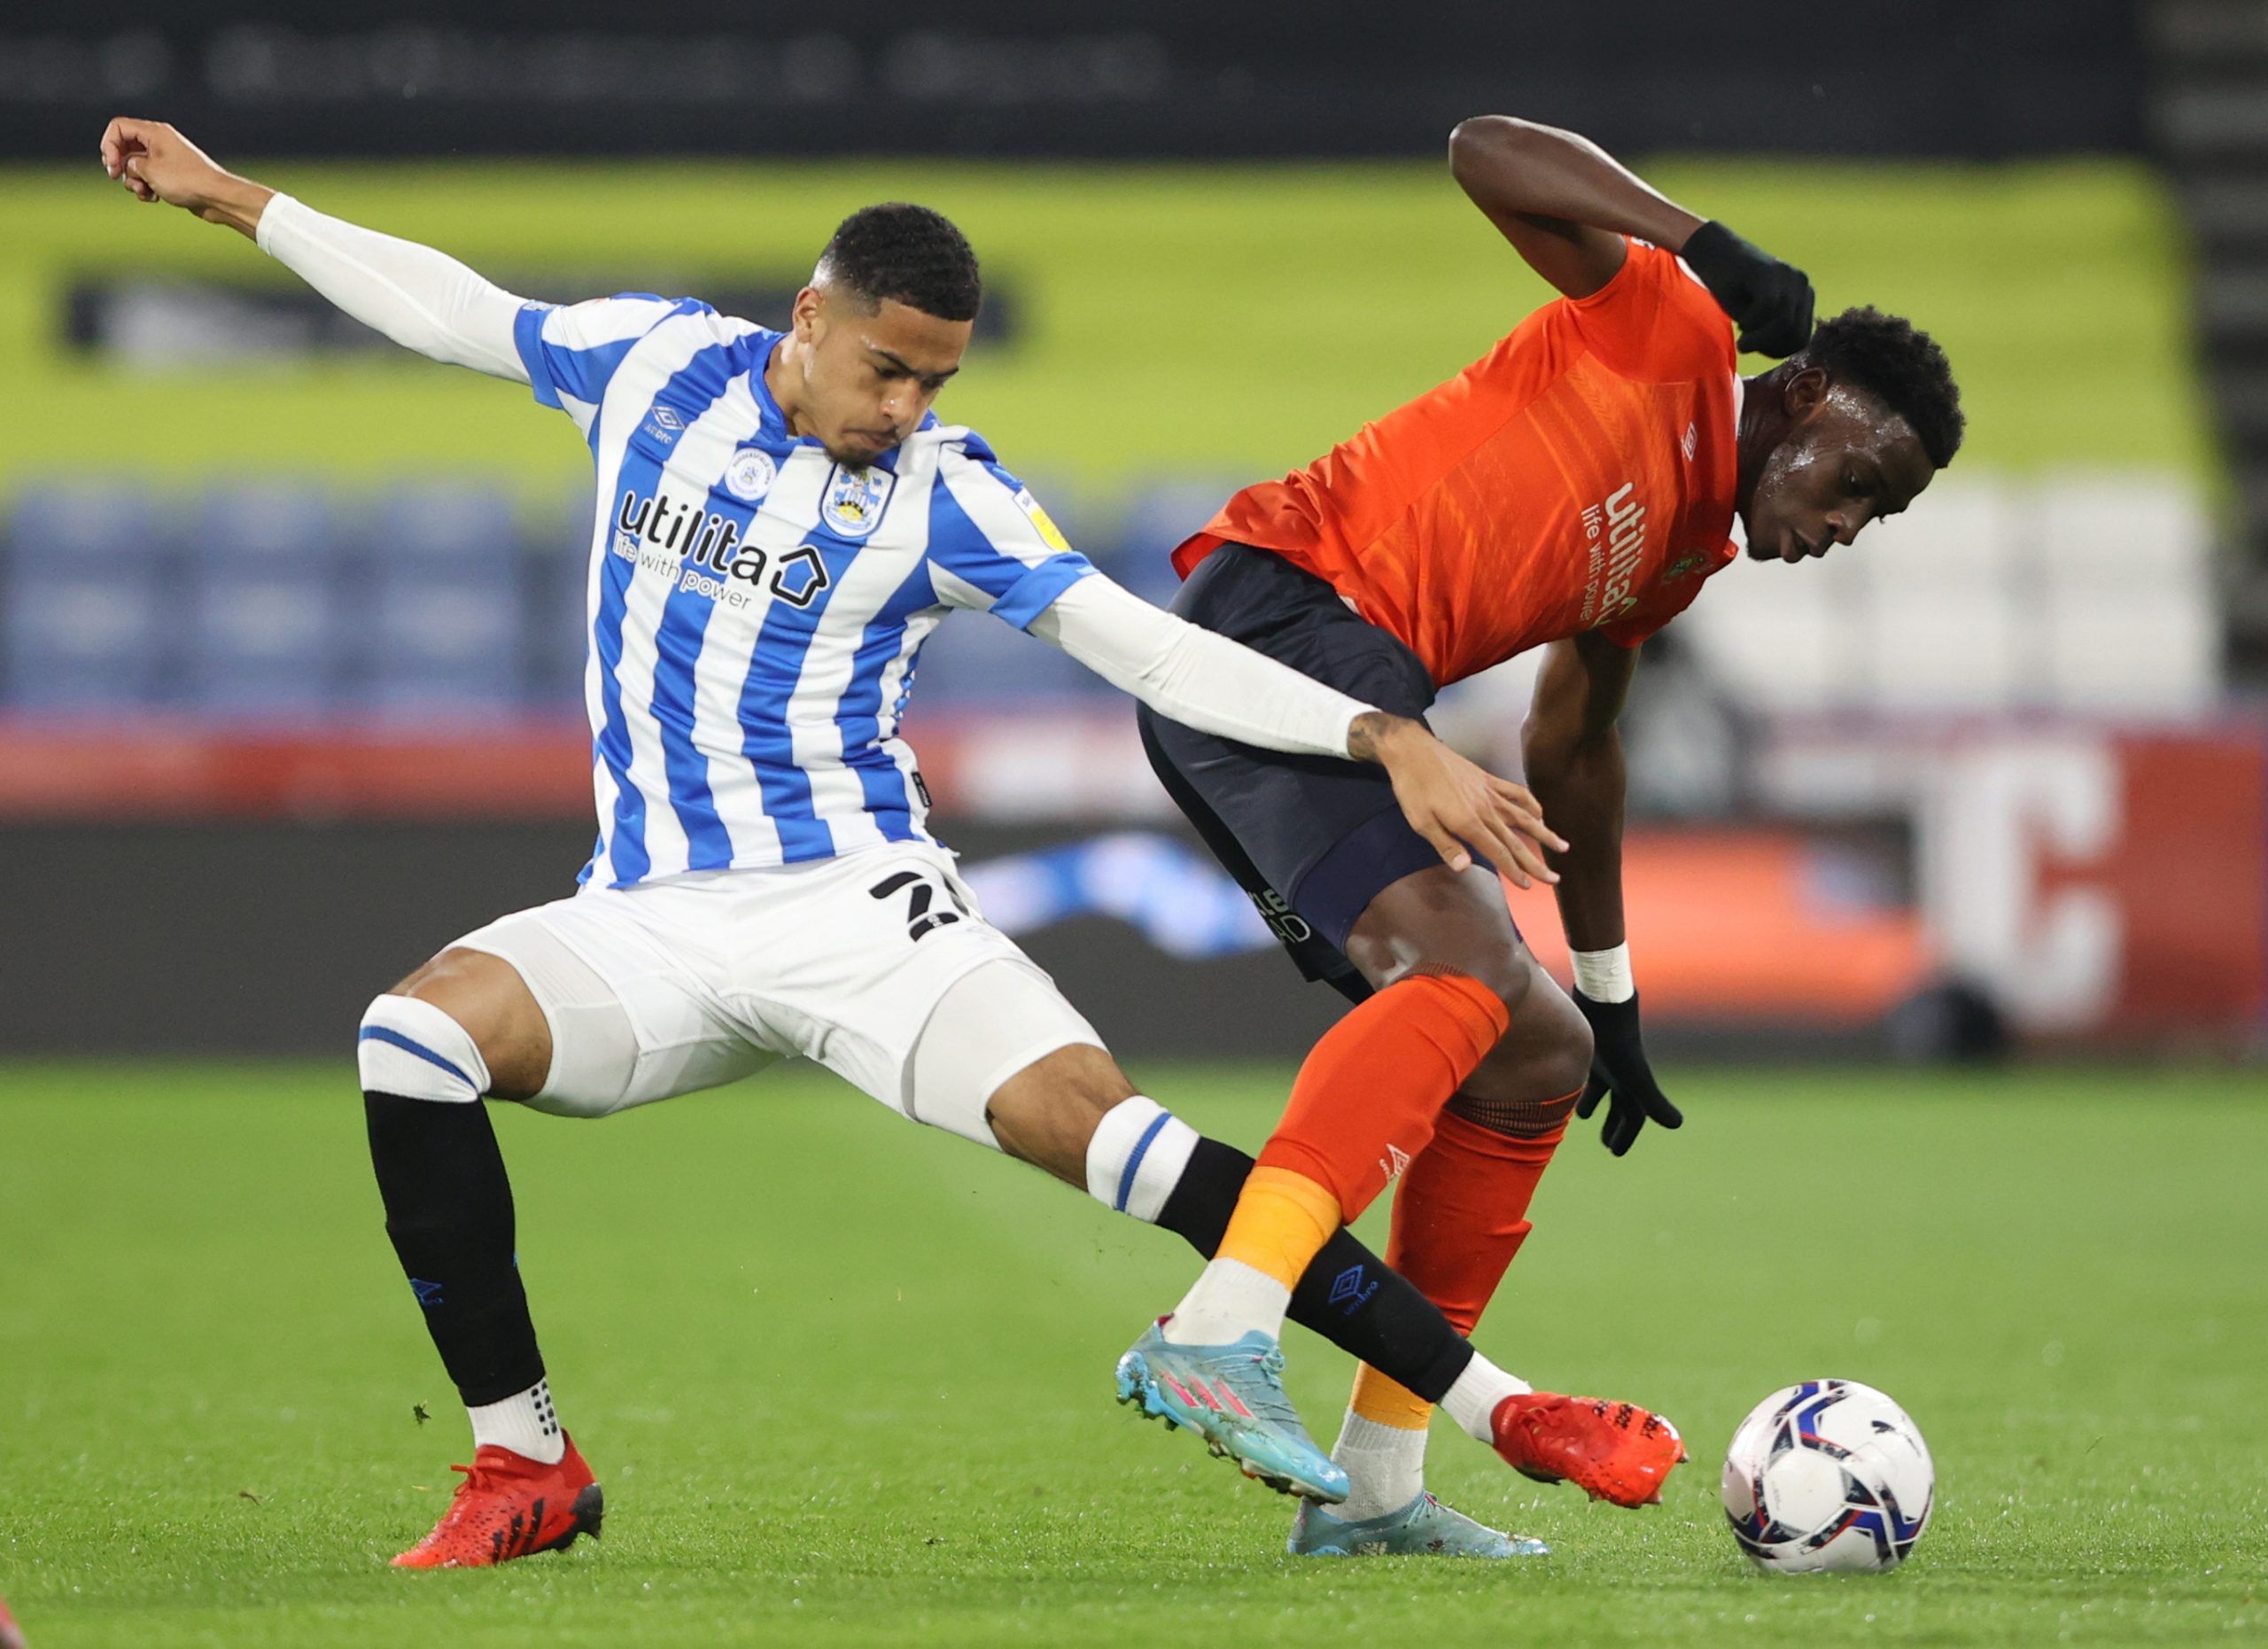 levi-colwill-huddersfield-town-championship-play-offs-premier-league-chelsea-crystal-palace-lampardSoccer Football - Championship - Huddersfield Town v Luton Town - John Smith's Stadium, Huddersfield, Britain - April 11, 2022  Huddersfield Town's Levi Colwill in action with Luton Town's Elijah Adebayo  Action Images/Molly Darlington  EDITORIAL USE ONLY. No use with unauthorized audio, video, data, fixture lists, club/league logos or 